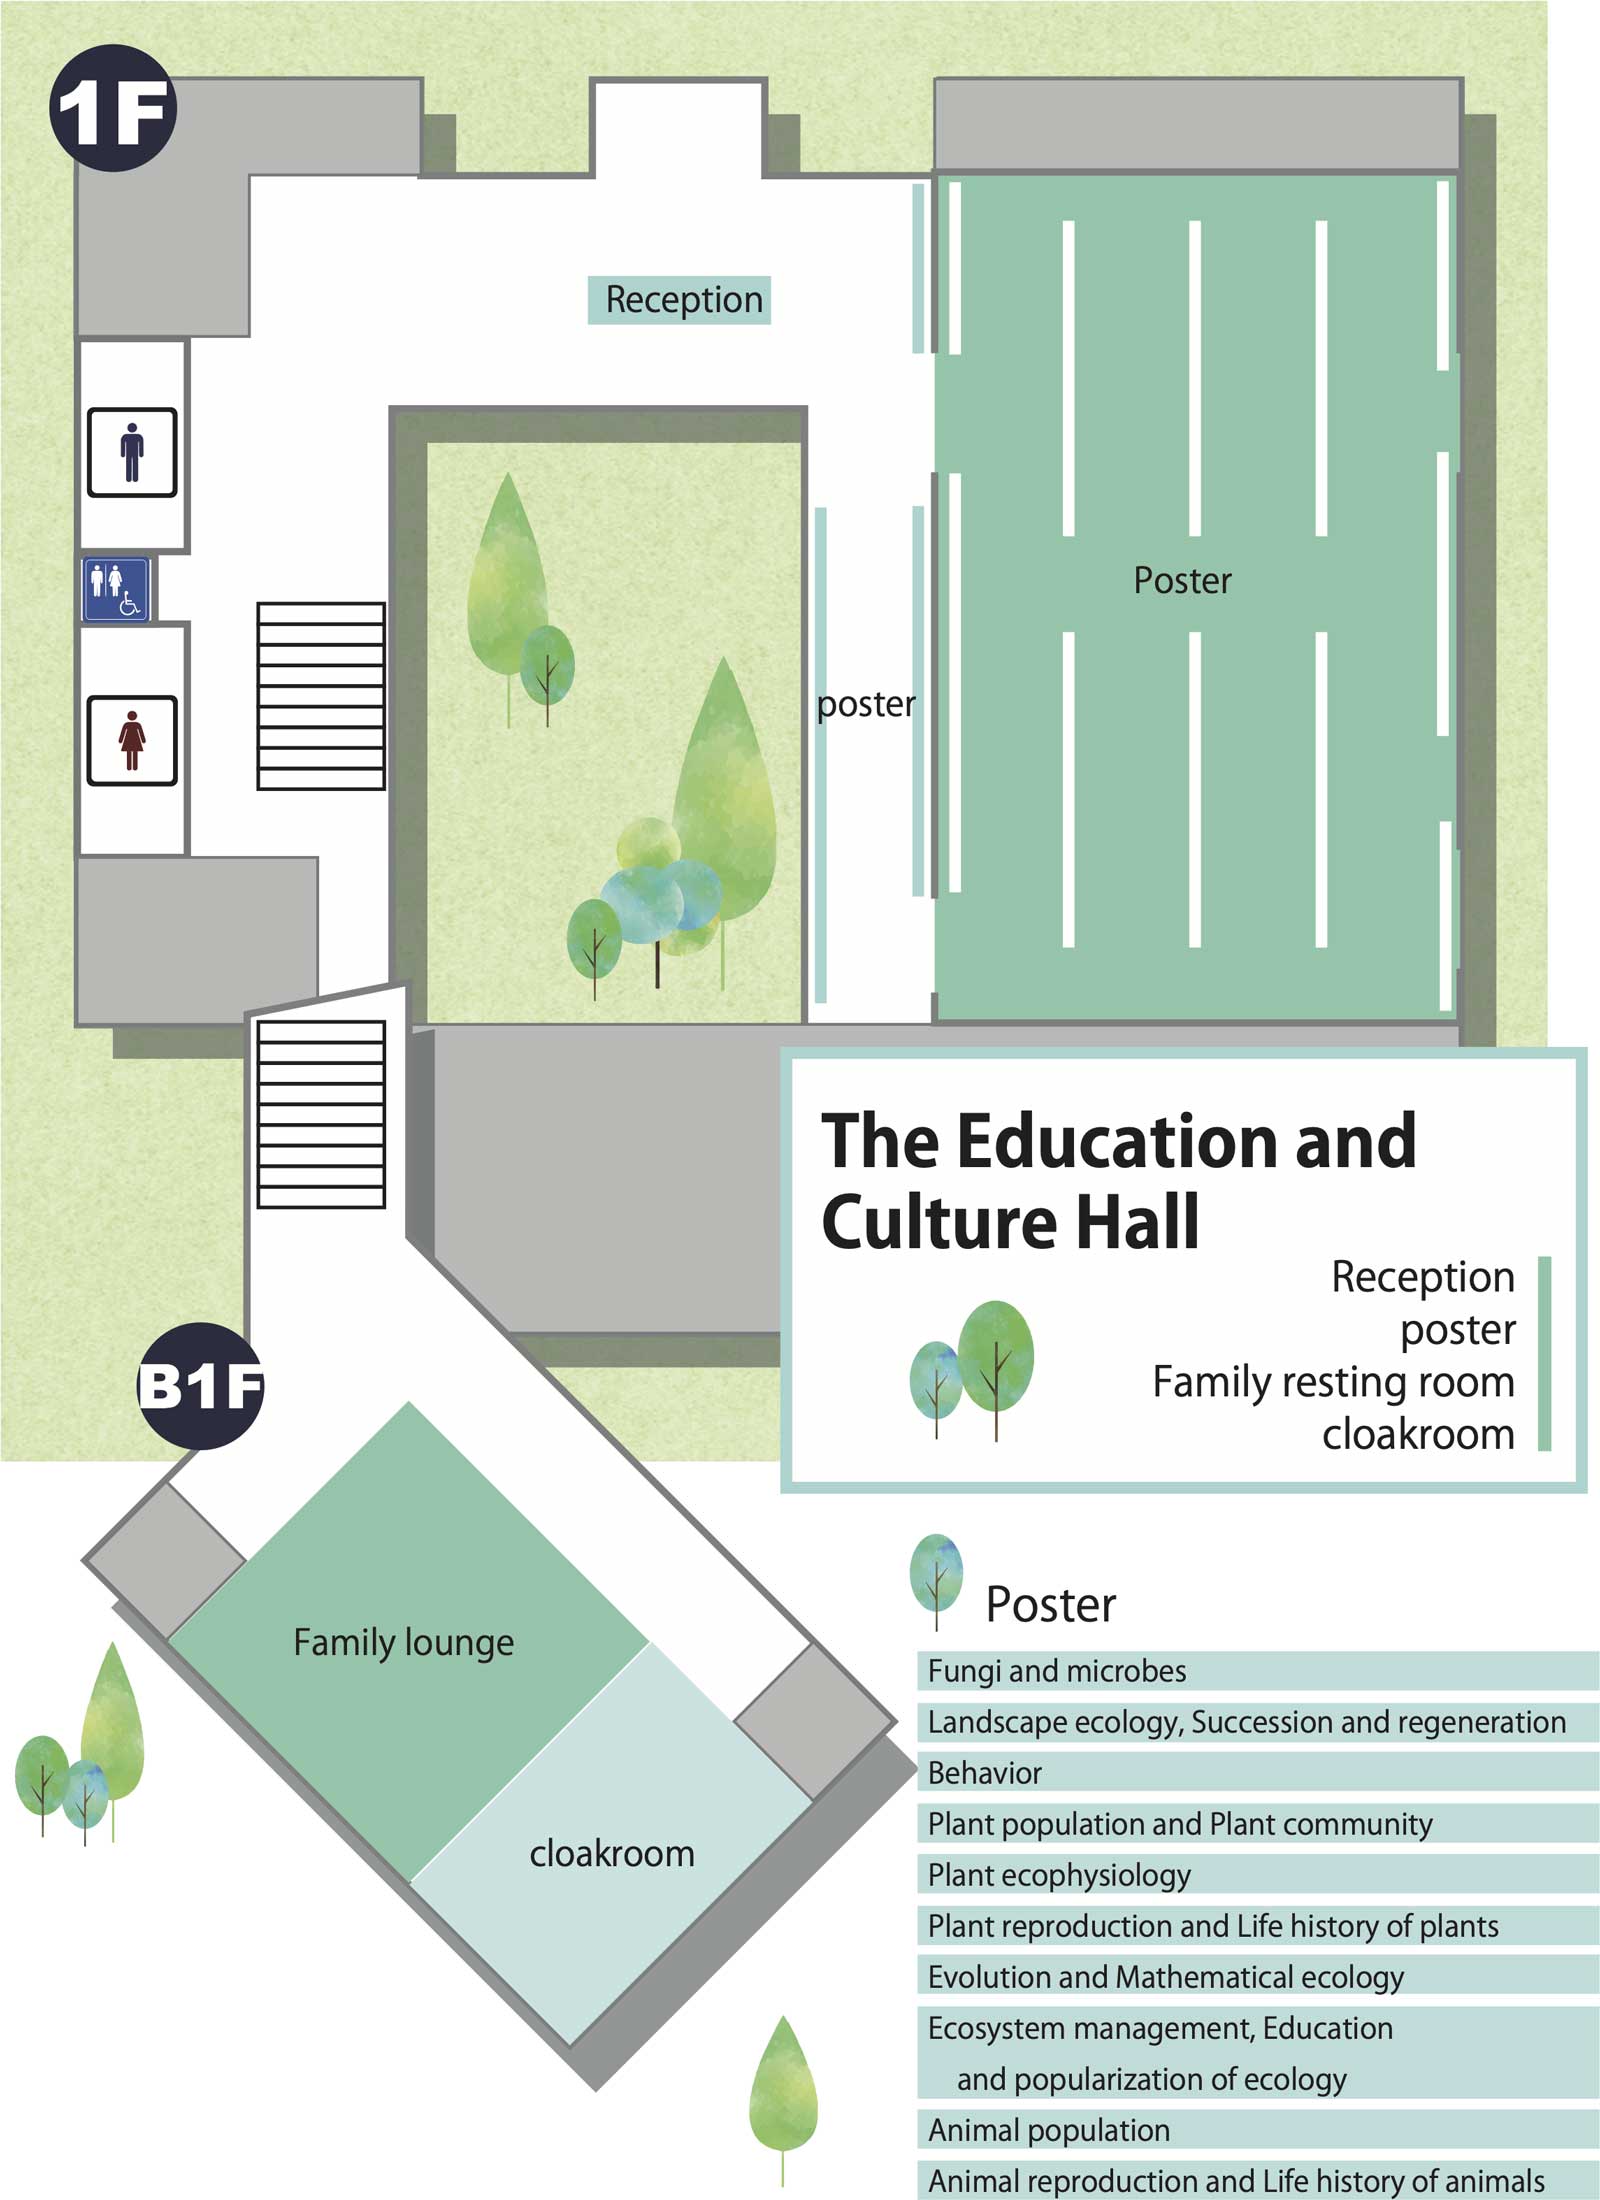 The Education and Culture Hall